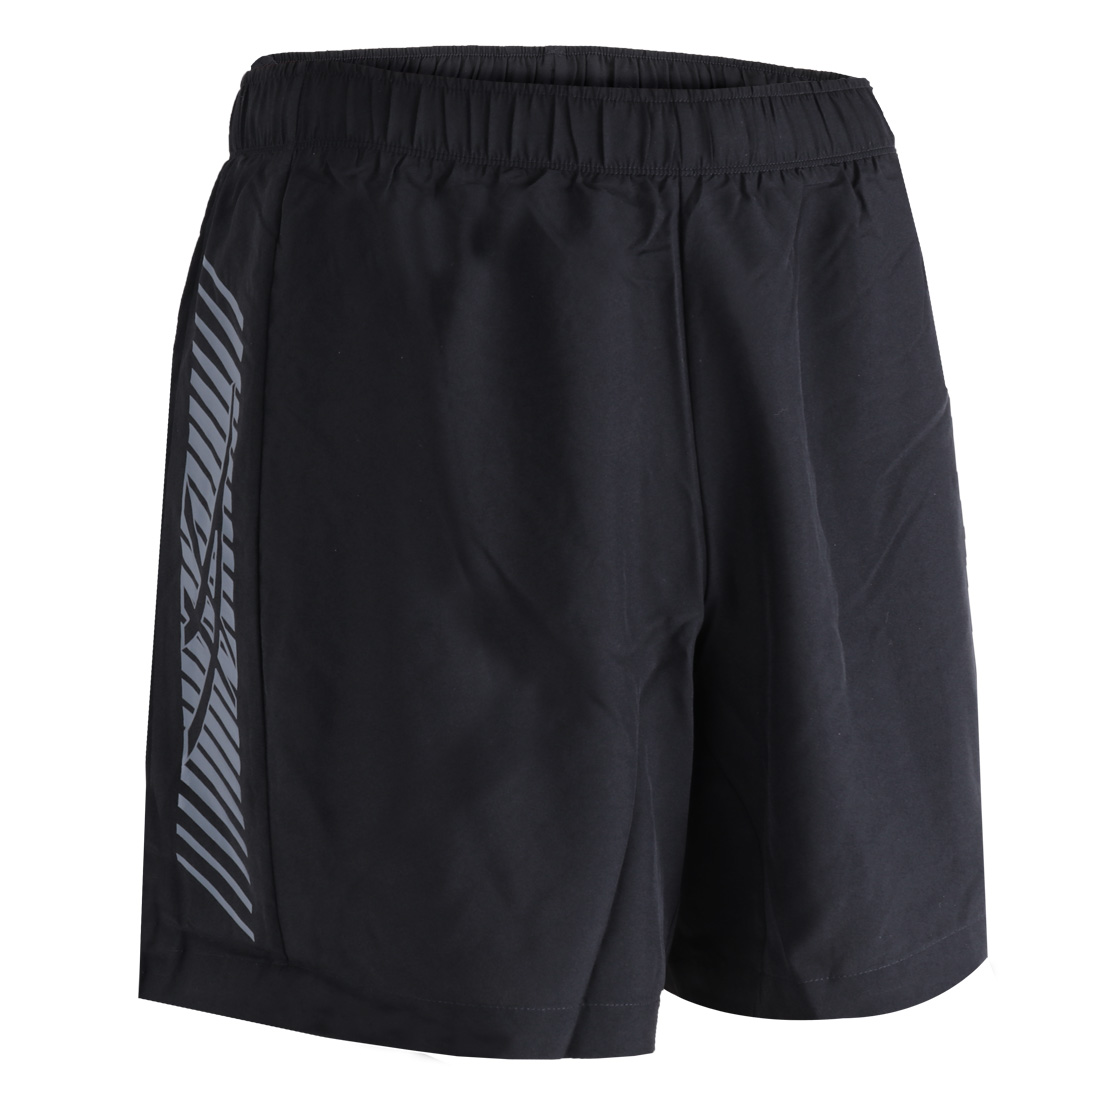 Picture of asics Icon 7 Inch Running Shorts Men - performance black/carrier grey